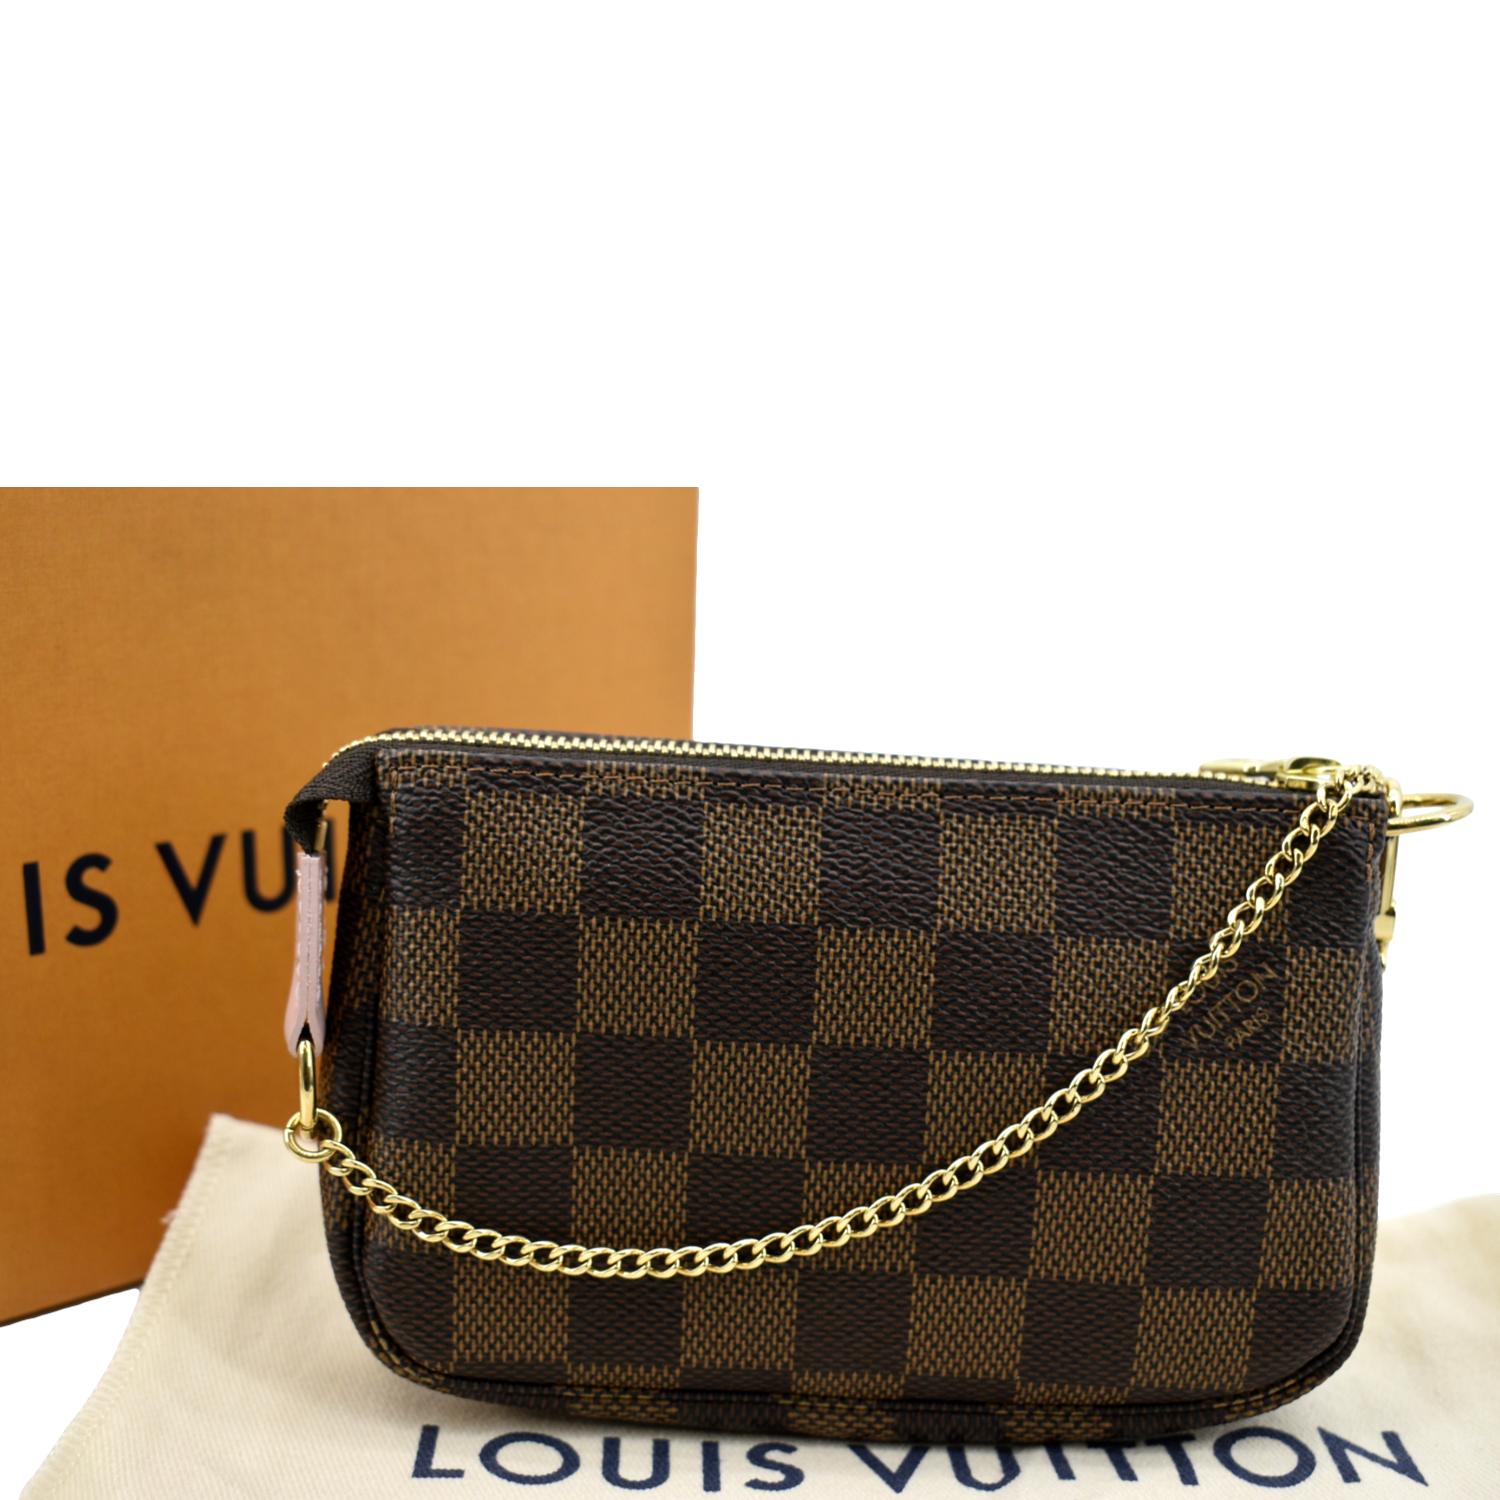 Louis Vuitton Limited Edition Christmas Shanghai Crossbody Bag  Louis  vuitton crossbody bag, Louis vuitton limited edition, Louis vuitton clutch  bag